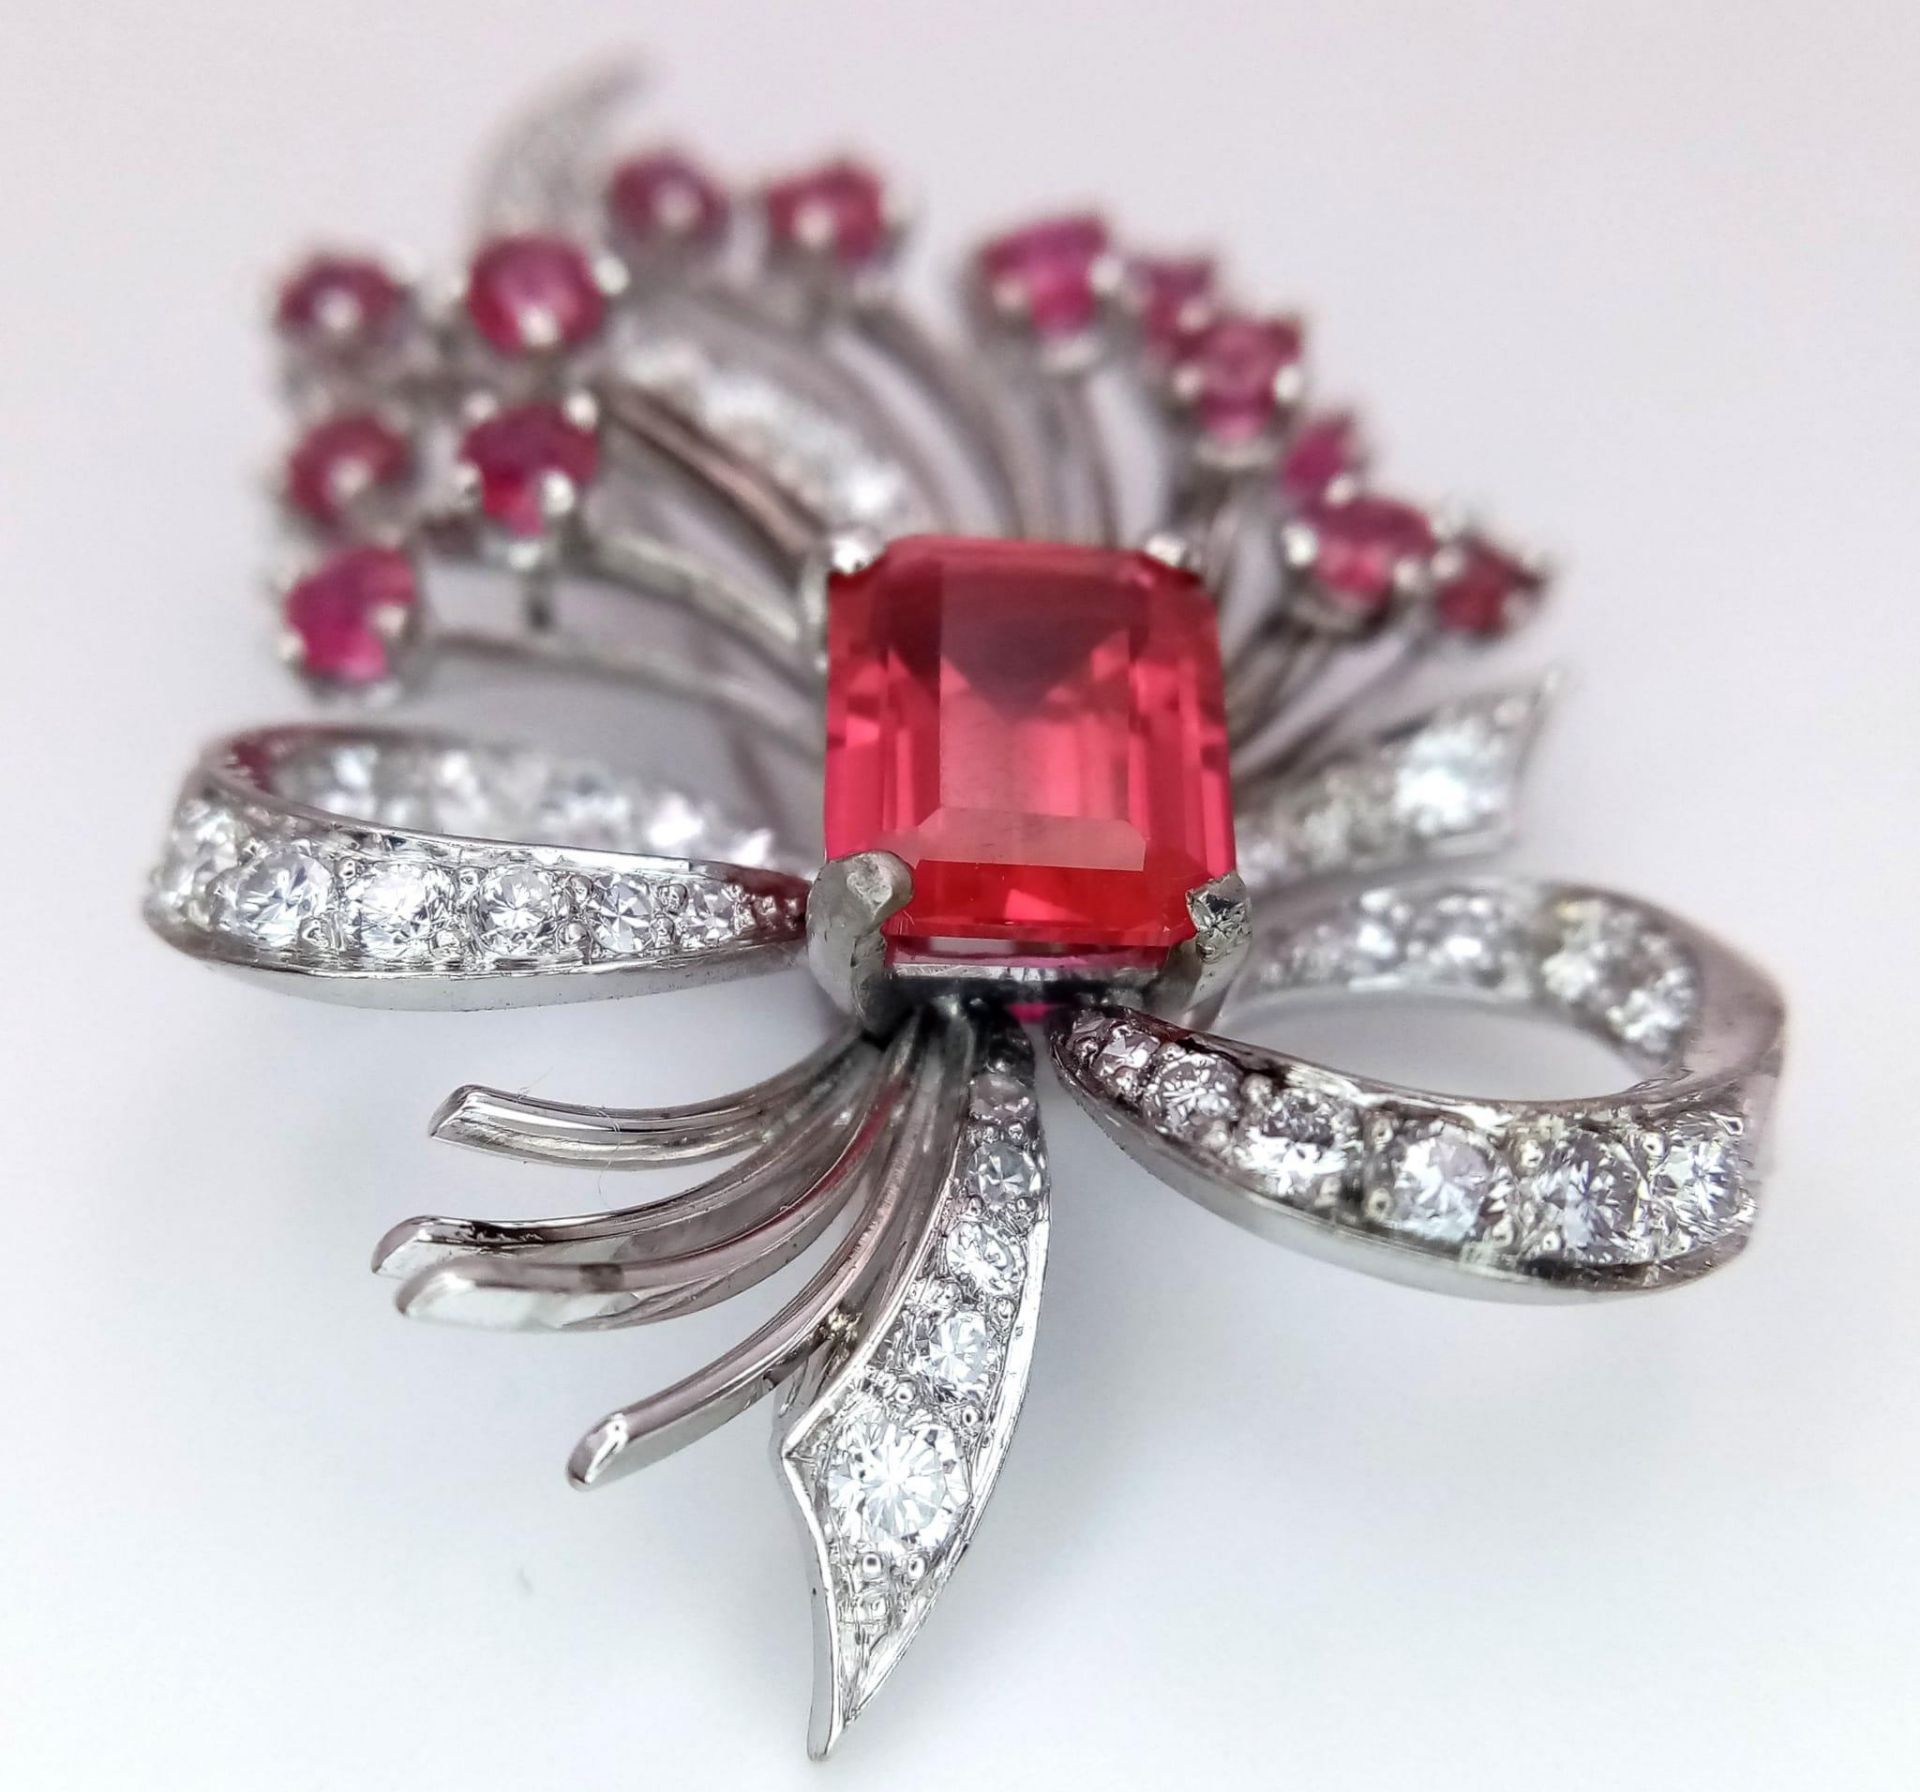 A STUNNING DIAMOND AND RUBY BROOCH SET IN PLATINUM , A MAJESTIC SPRAY OF RUBIES EMINATING FROM A - Image 3 of 7